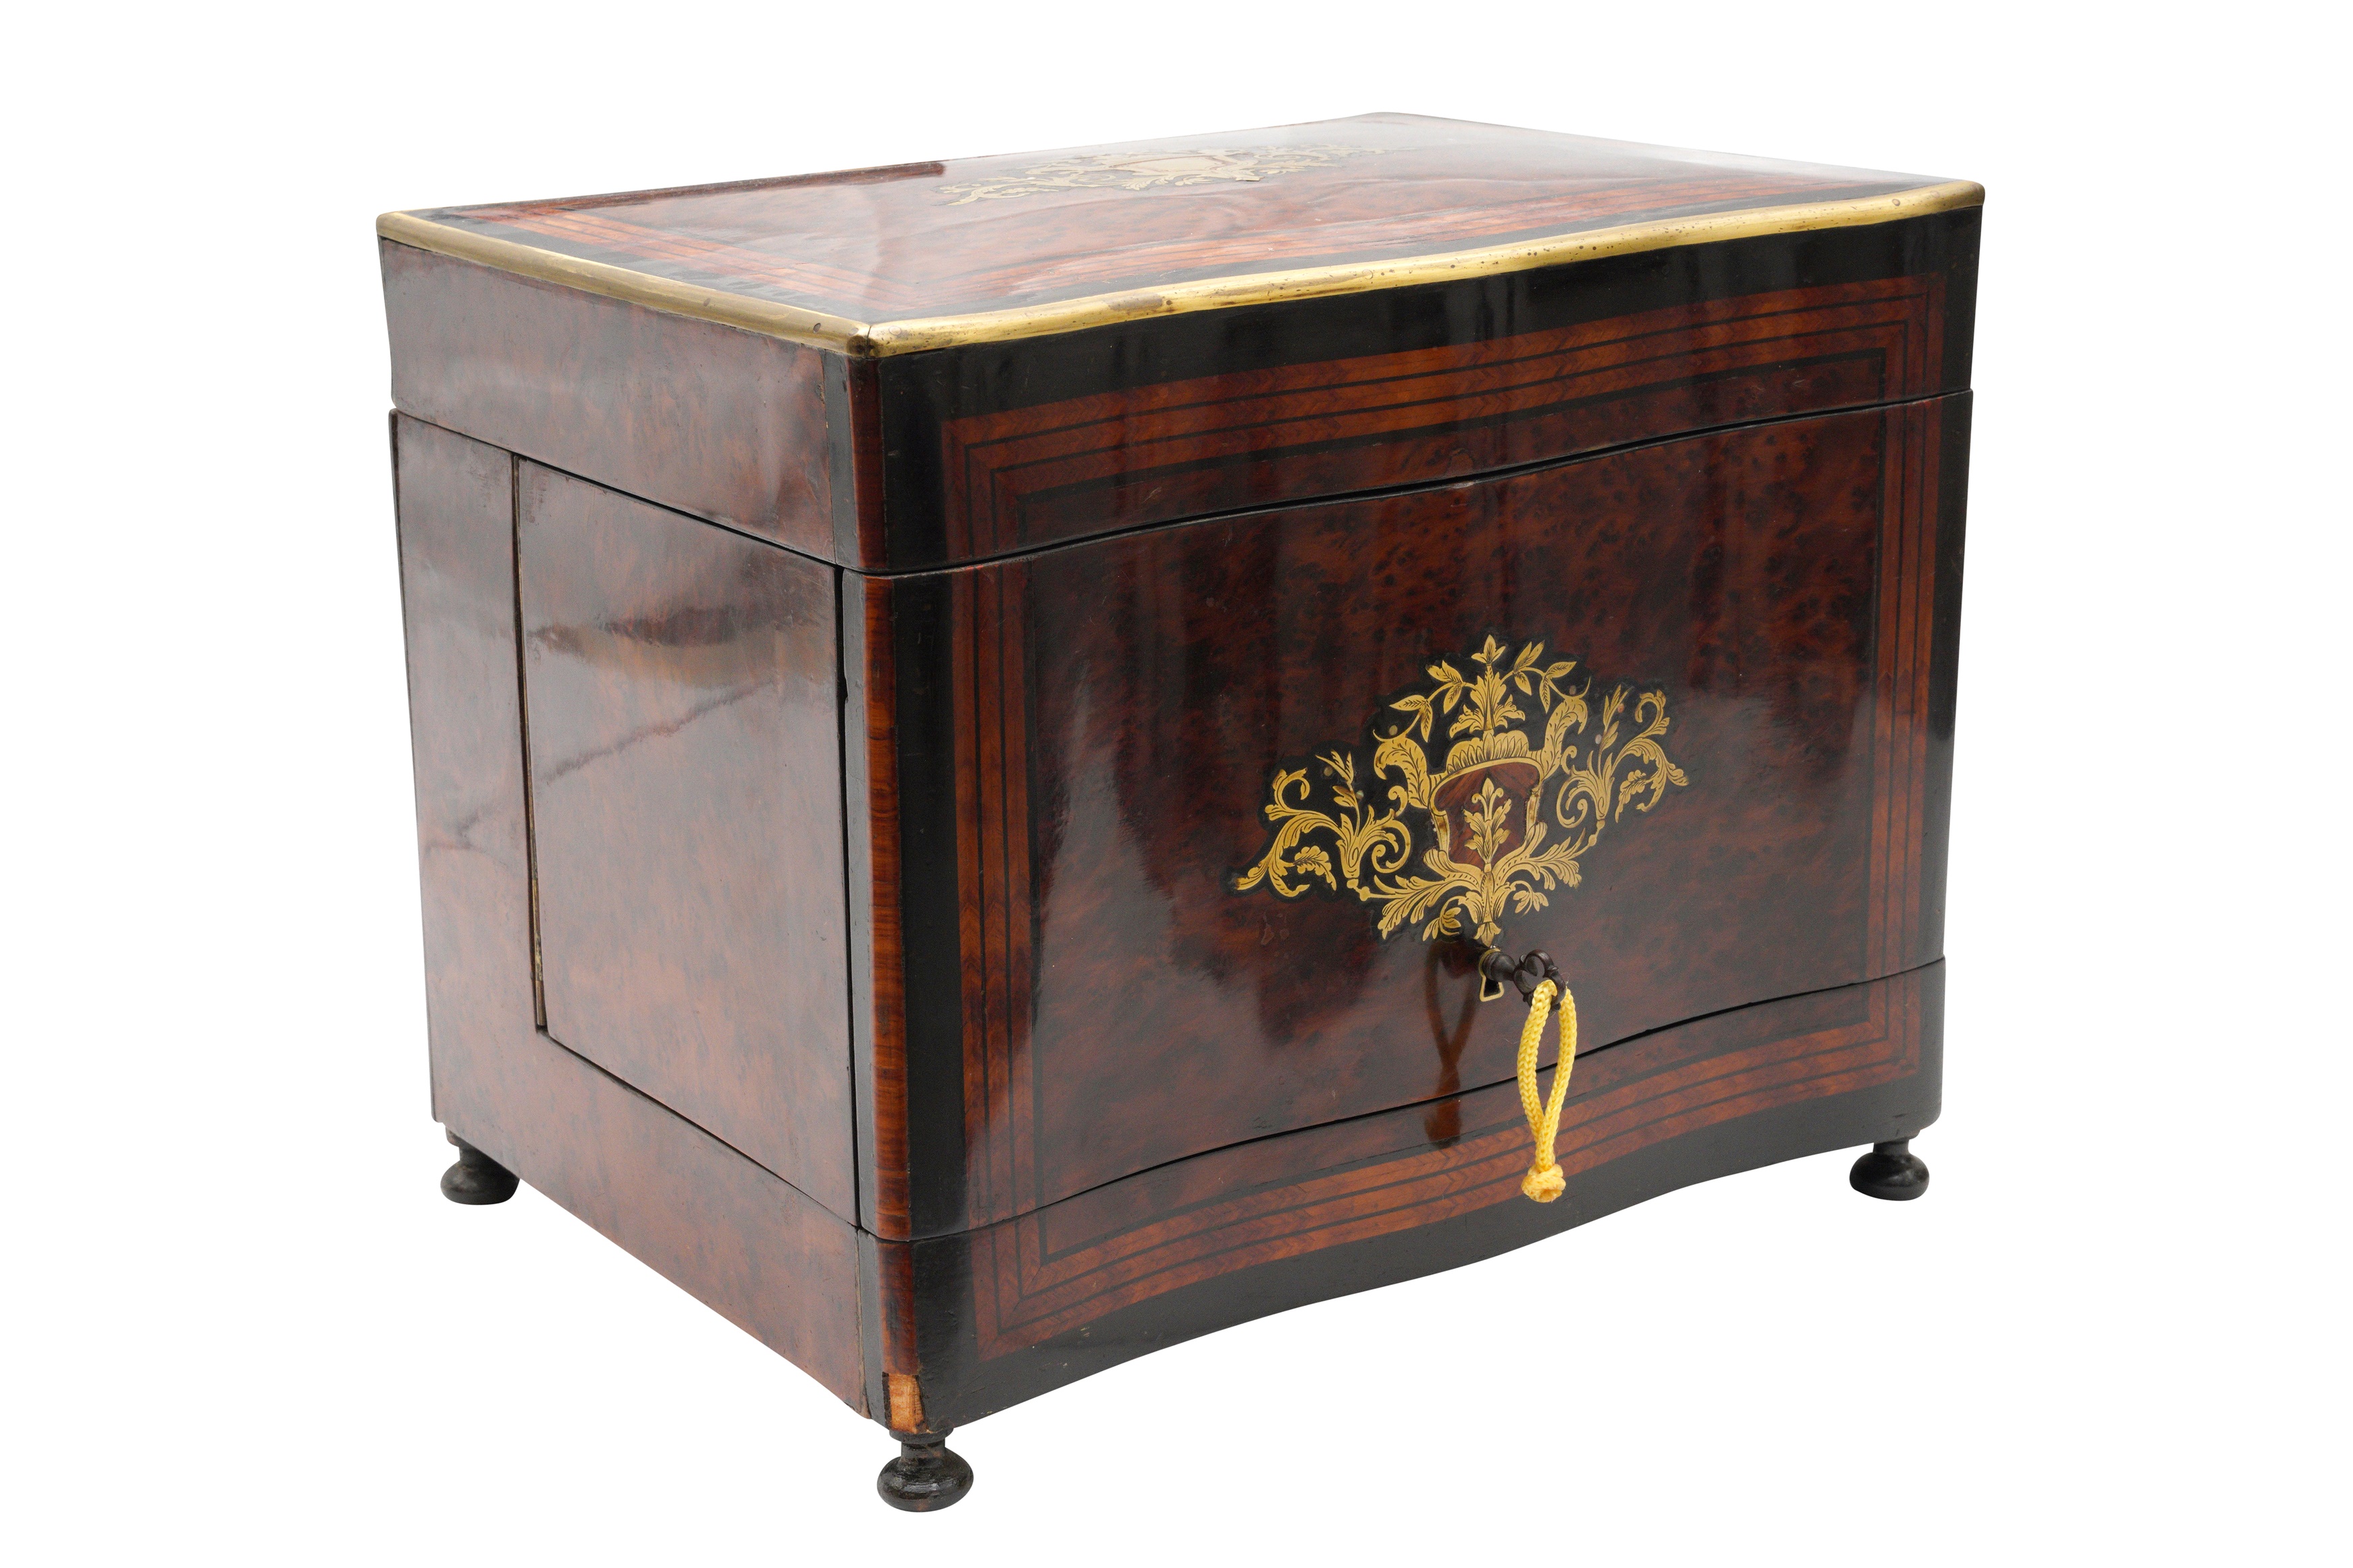 A 19TH CENTURY FRENCH INLAID AMBOYNA SERPENTINE DRINKS CABINET - Image 3 of 3